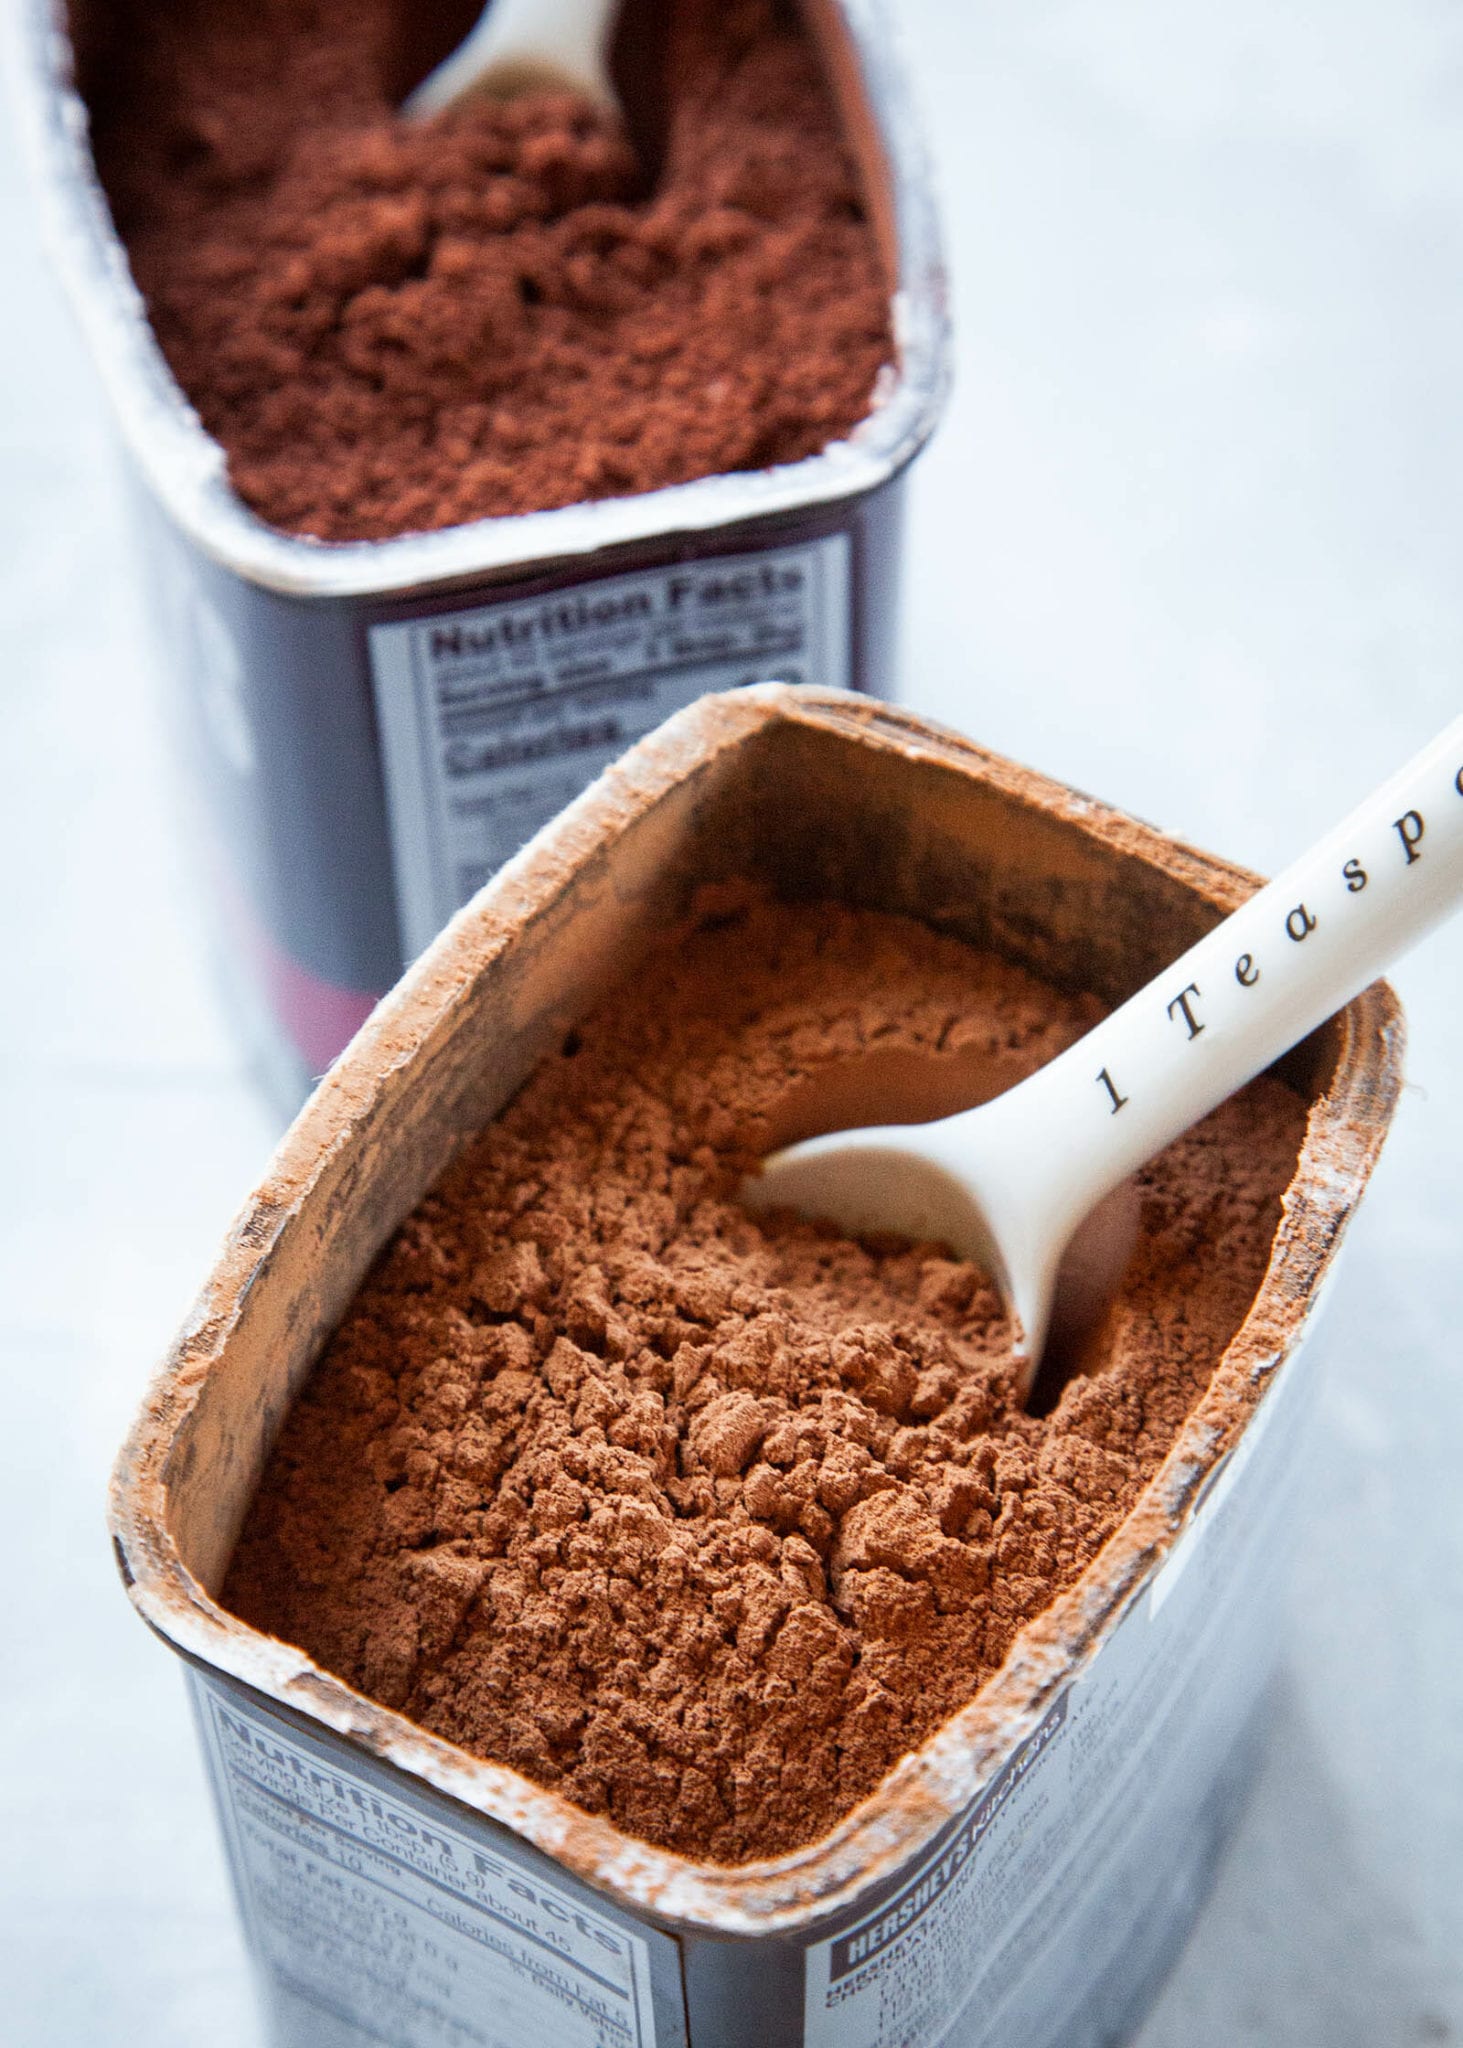 What’s the Difference Between Dutch-Process and Natural Cocoa Powder?